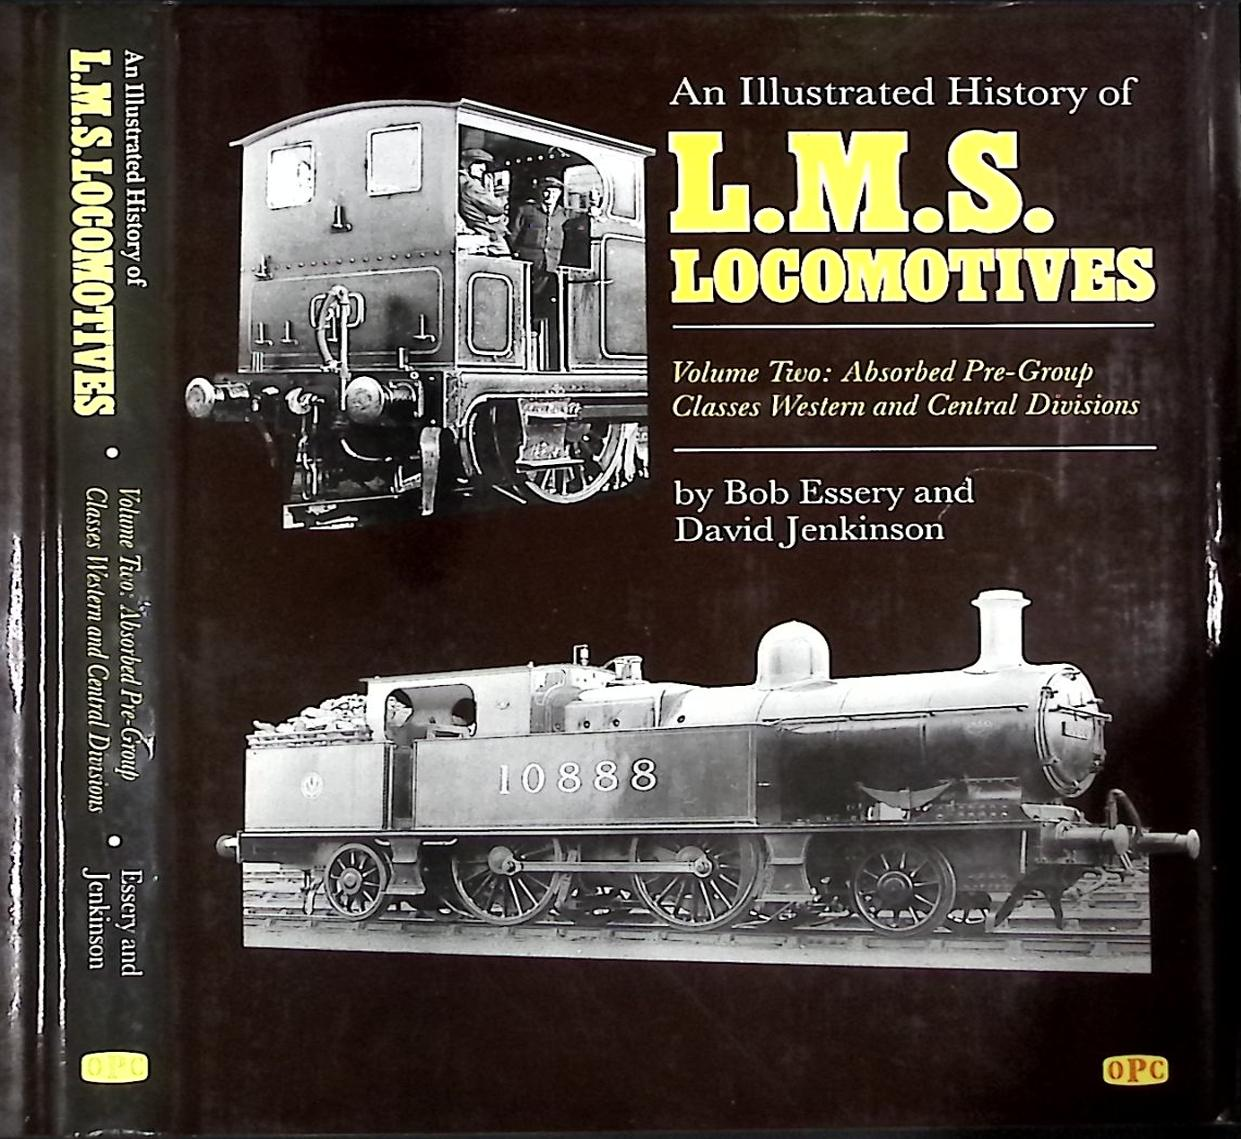 LMS [L.M.S.] Locomotives. Volume Two: Absorbed Pre-Group Classes, Western and Central Divisions. An Illustrated History.